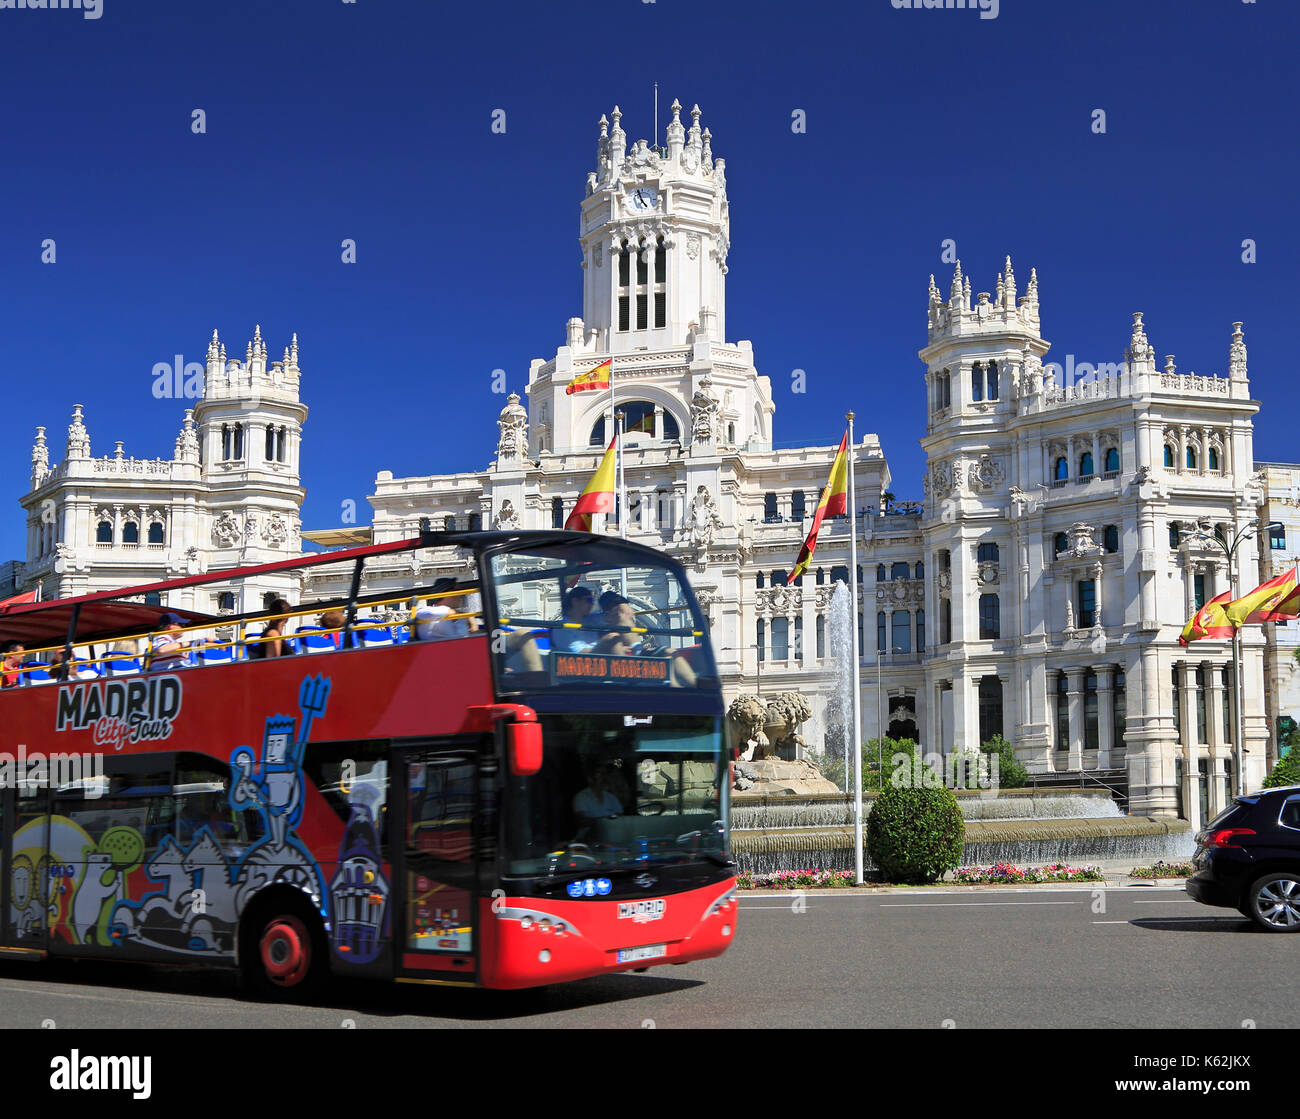 MADRID, SPAIN - JUNE 26, 2017: Madrid City Tour Bus passing in front of Cybele Palace with tourist enjoying the ride. Stock Photo